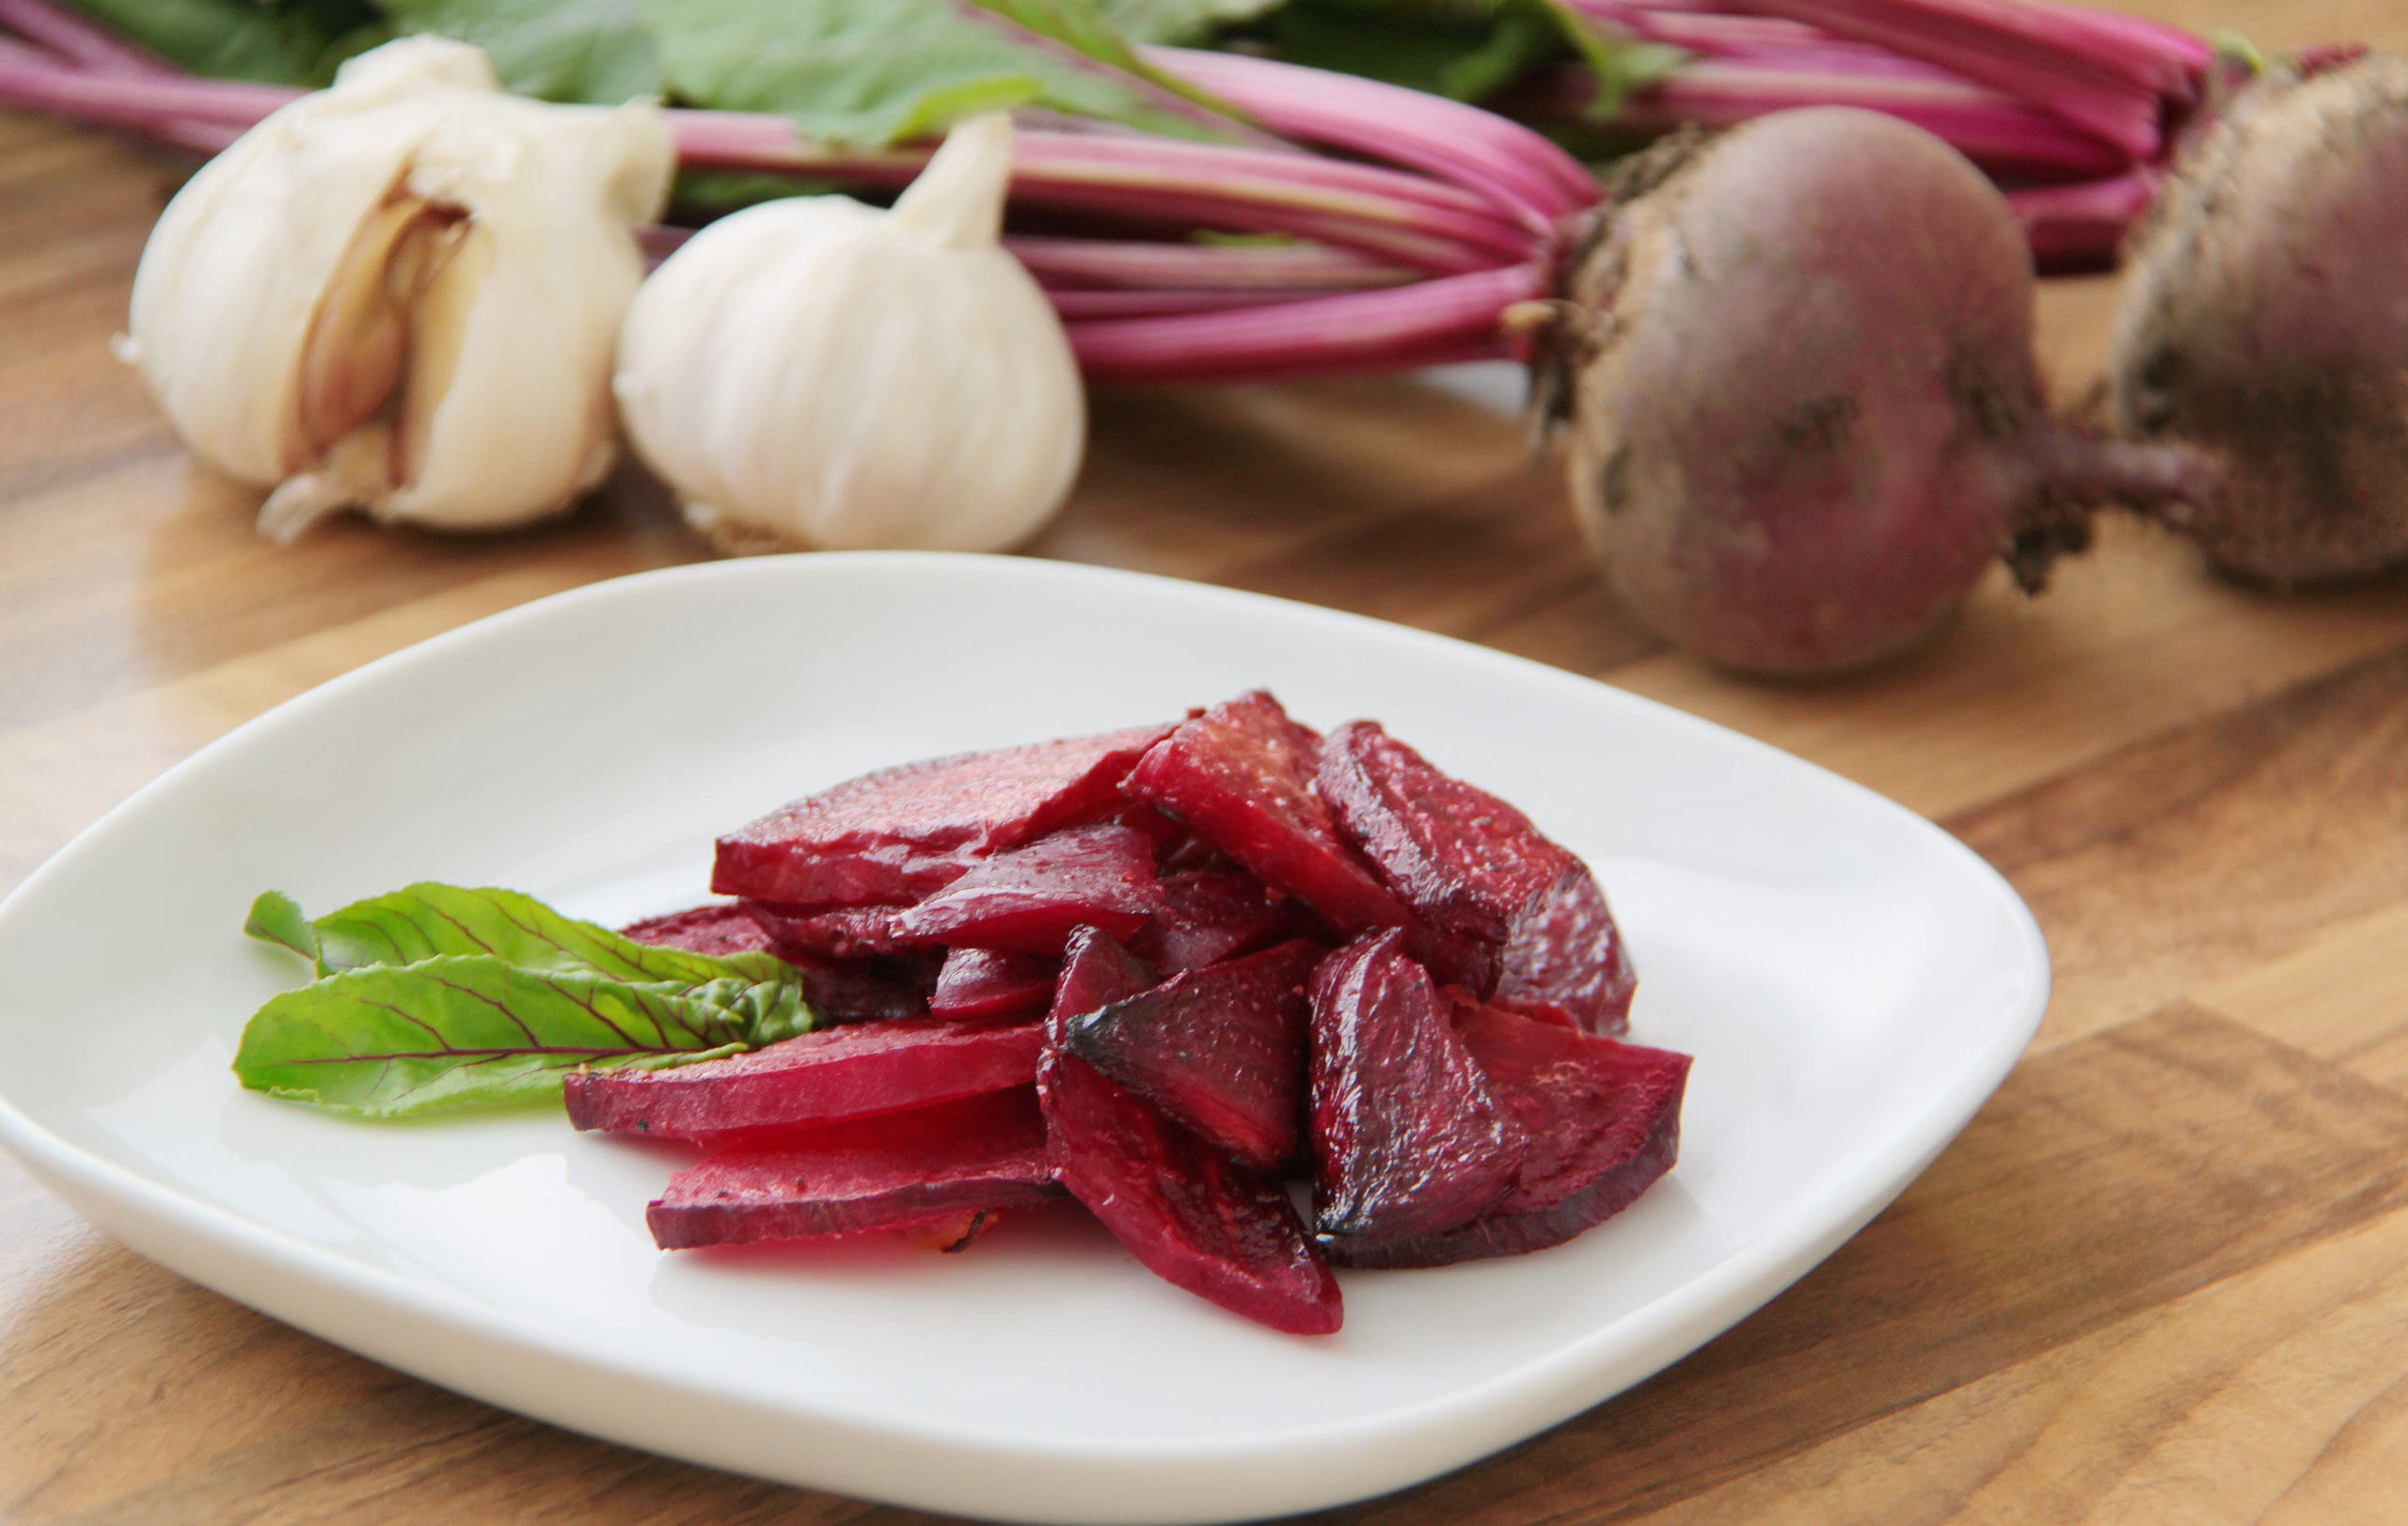 Roasted-slices-of-beetroot-served-on-a-white-plate-scaled